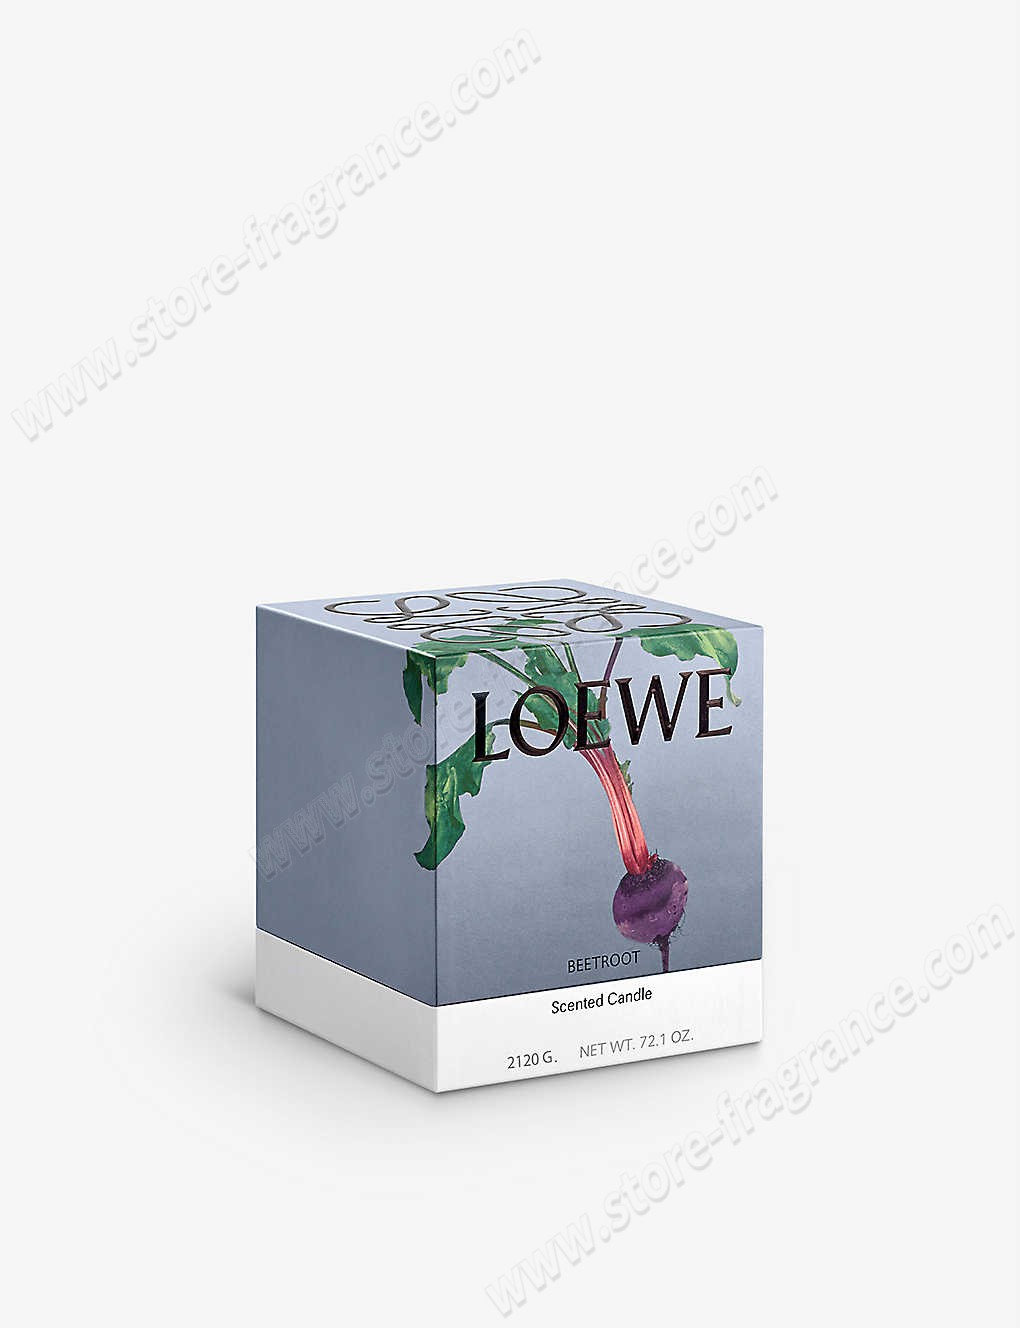 LOEWE/Beetroot large scented candle 2.12kg ✿ Discount Store - -1